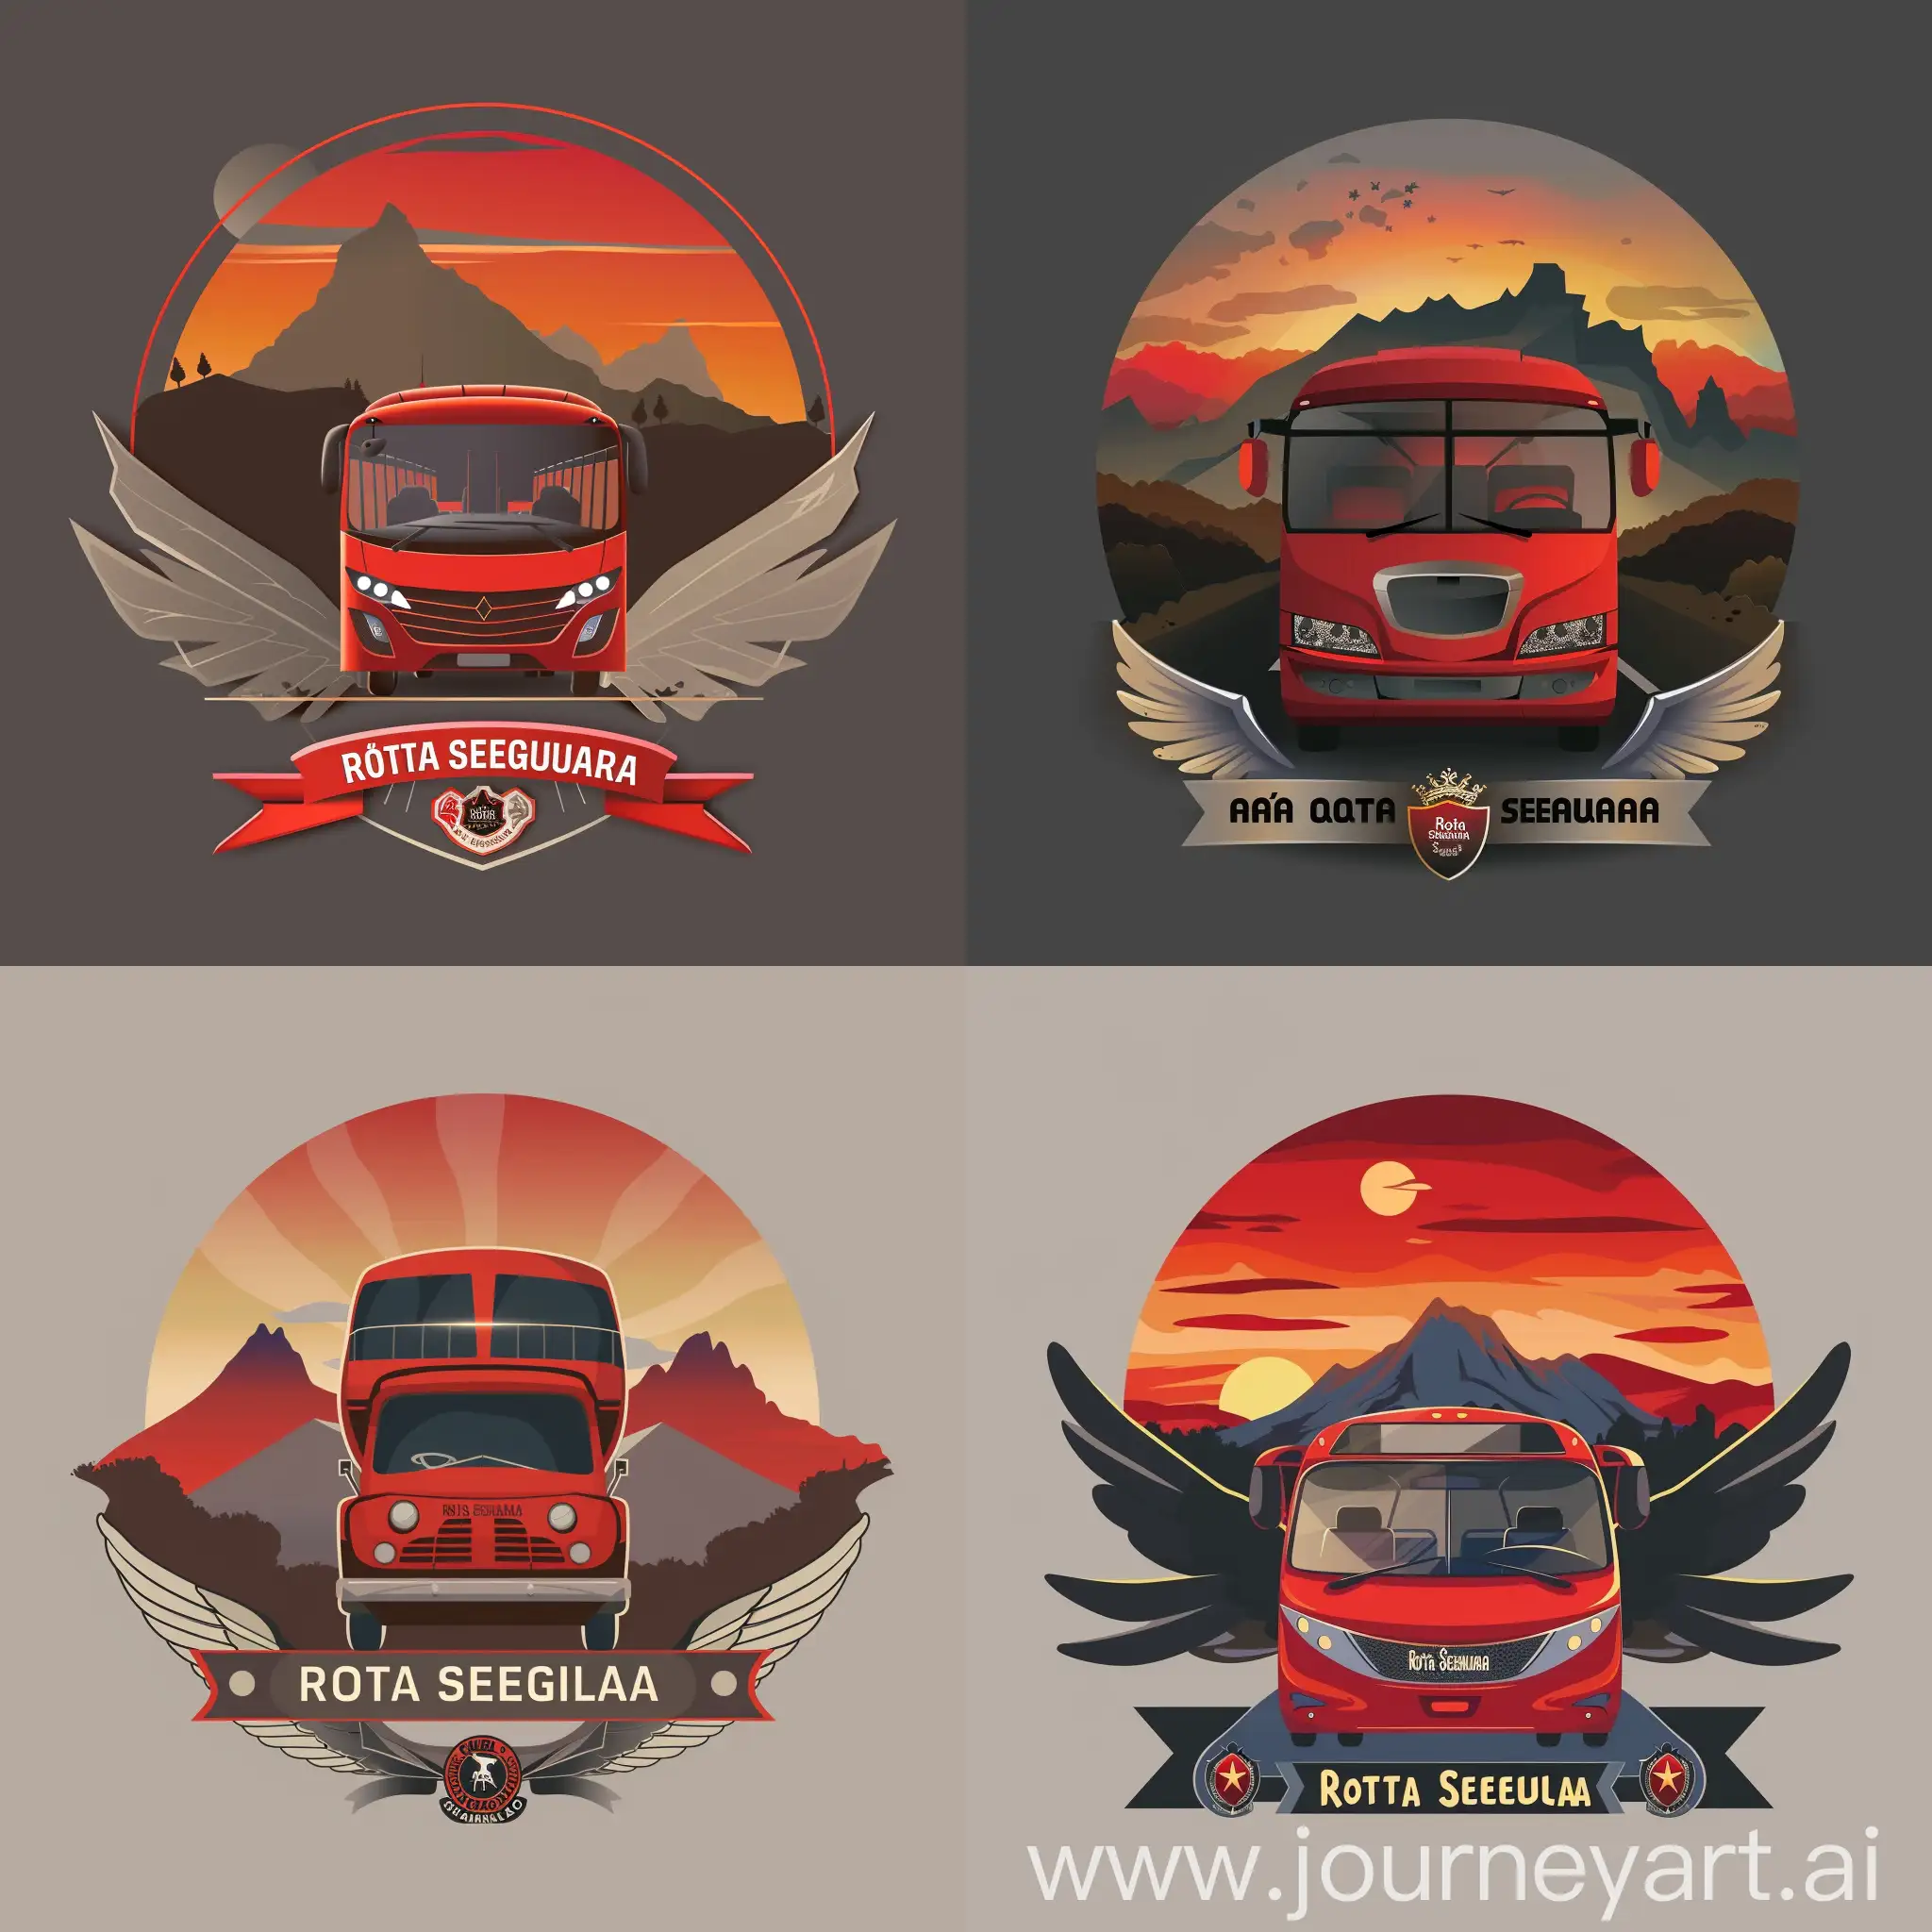 a realistic logo, beautiful red bus, going forward, small mountains behind and sunset behind, "Rota Segura" text below, use badges, very small wings, red and gray as main colours